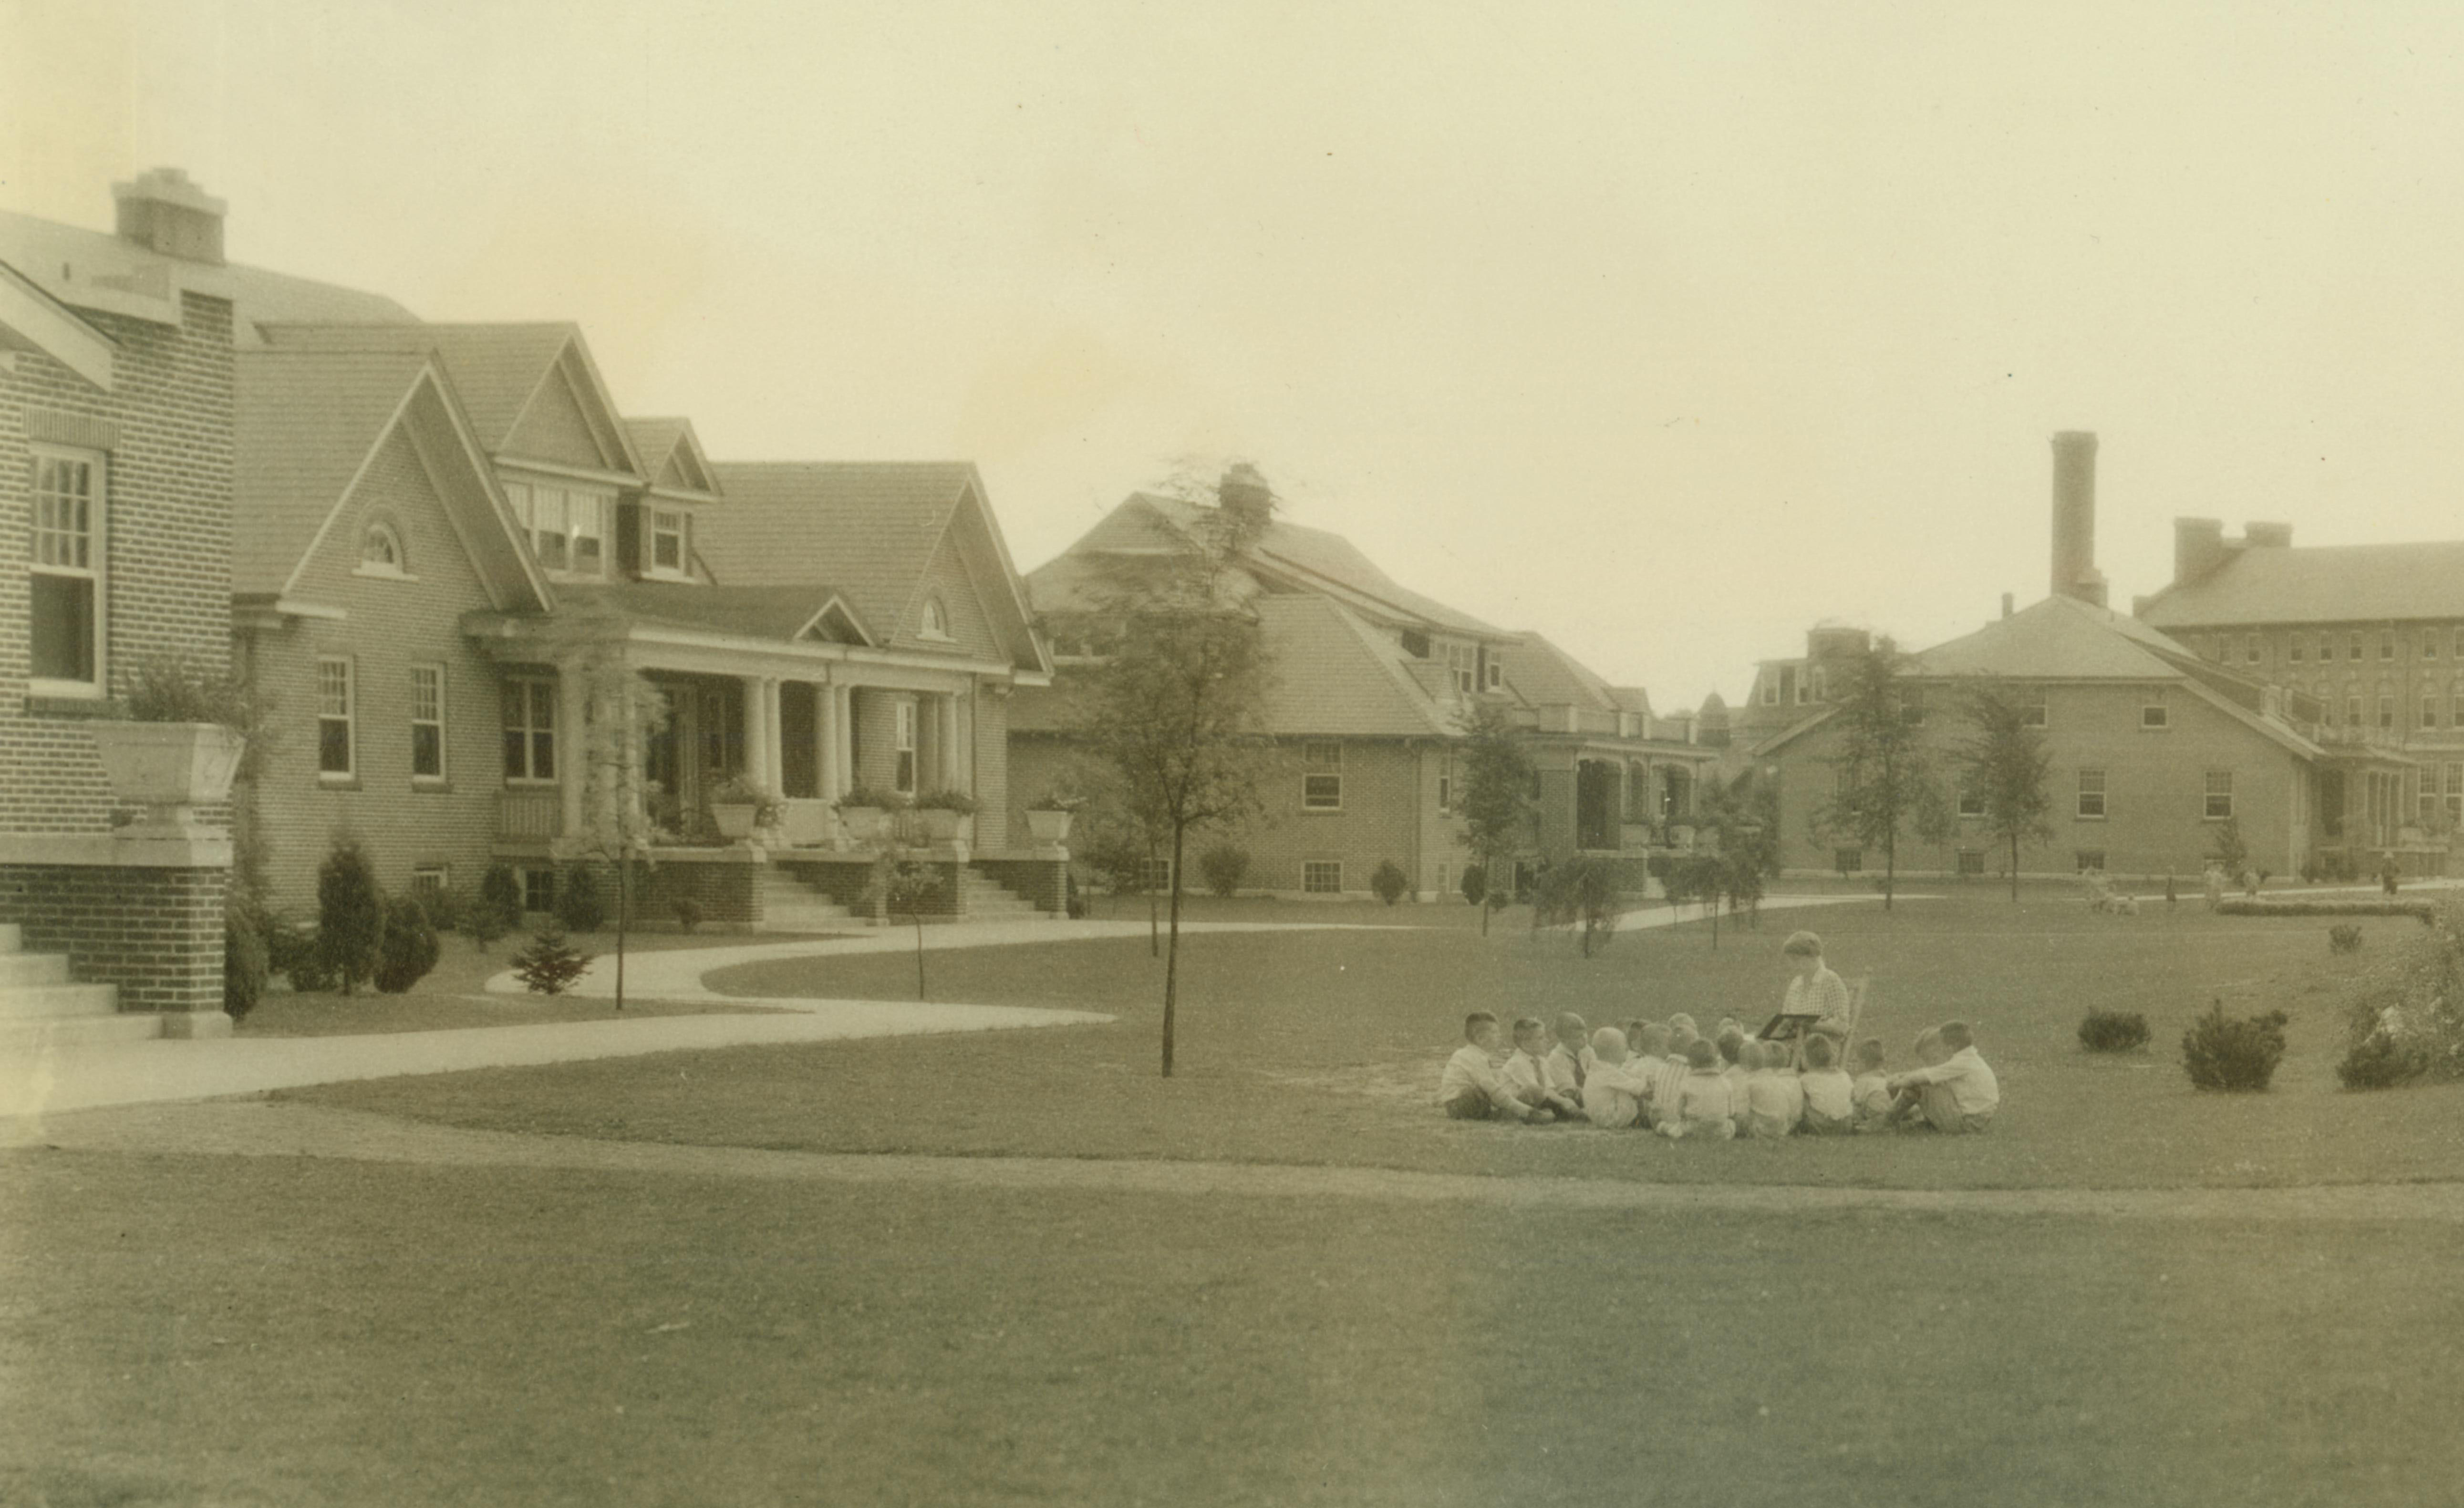 MHS cottages in the 1930s